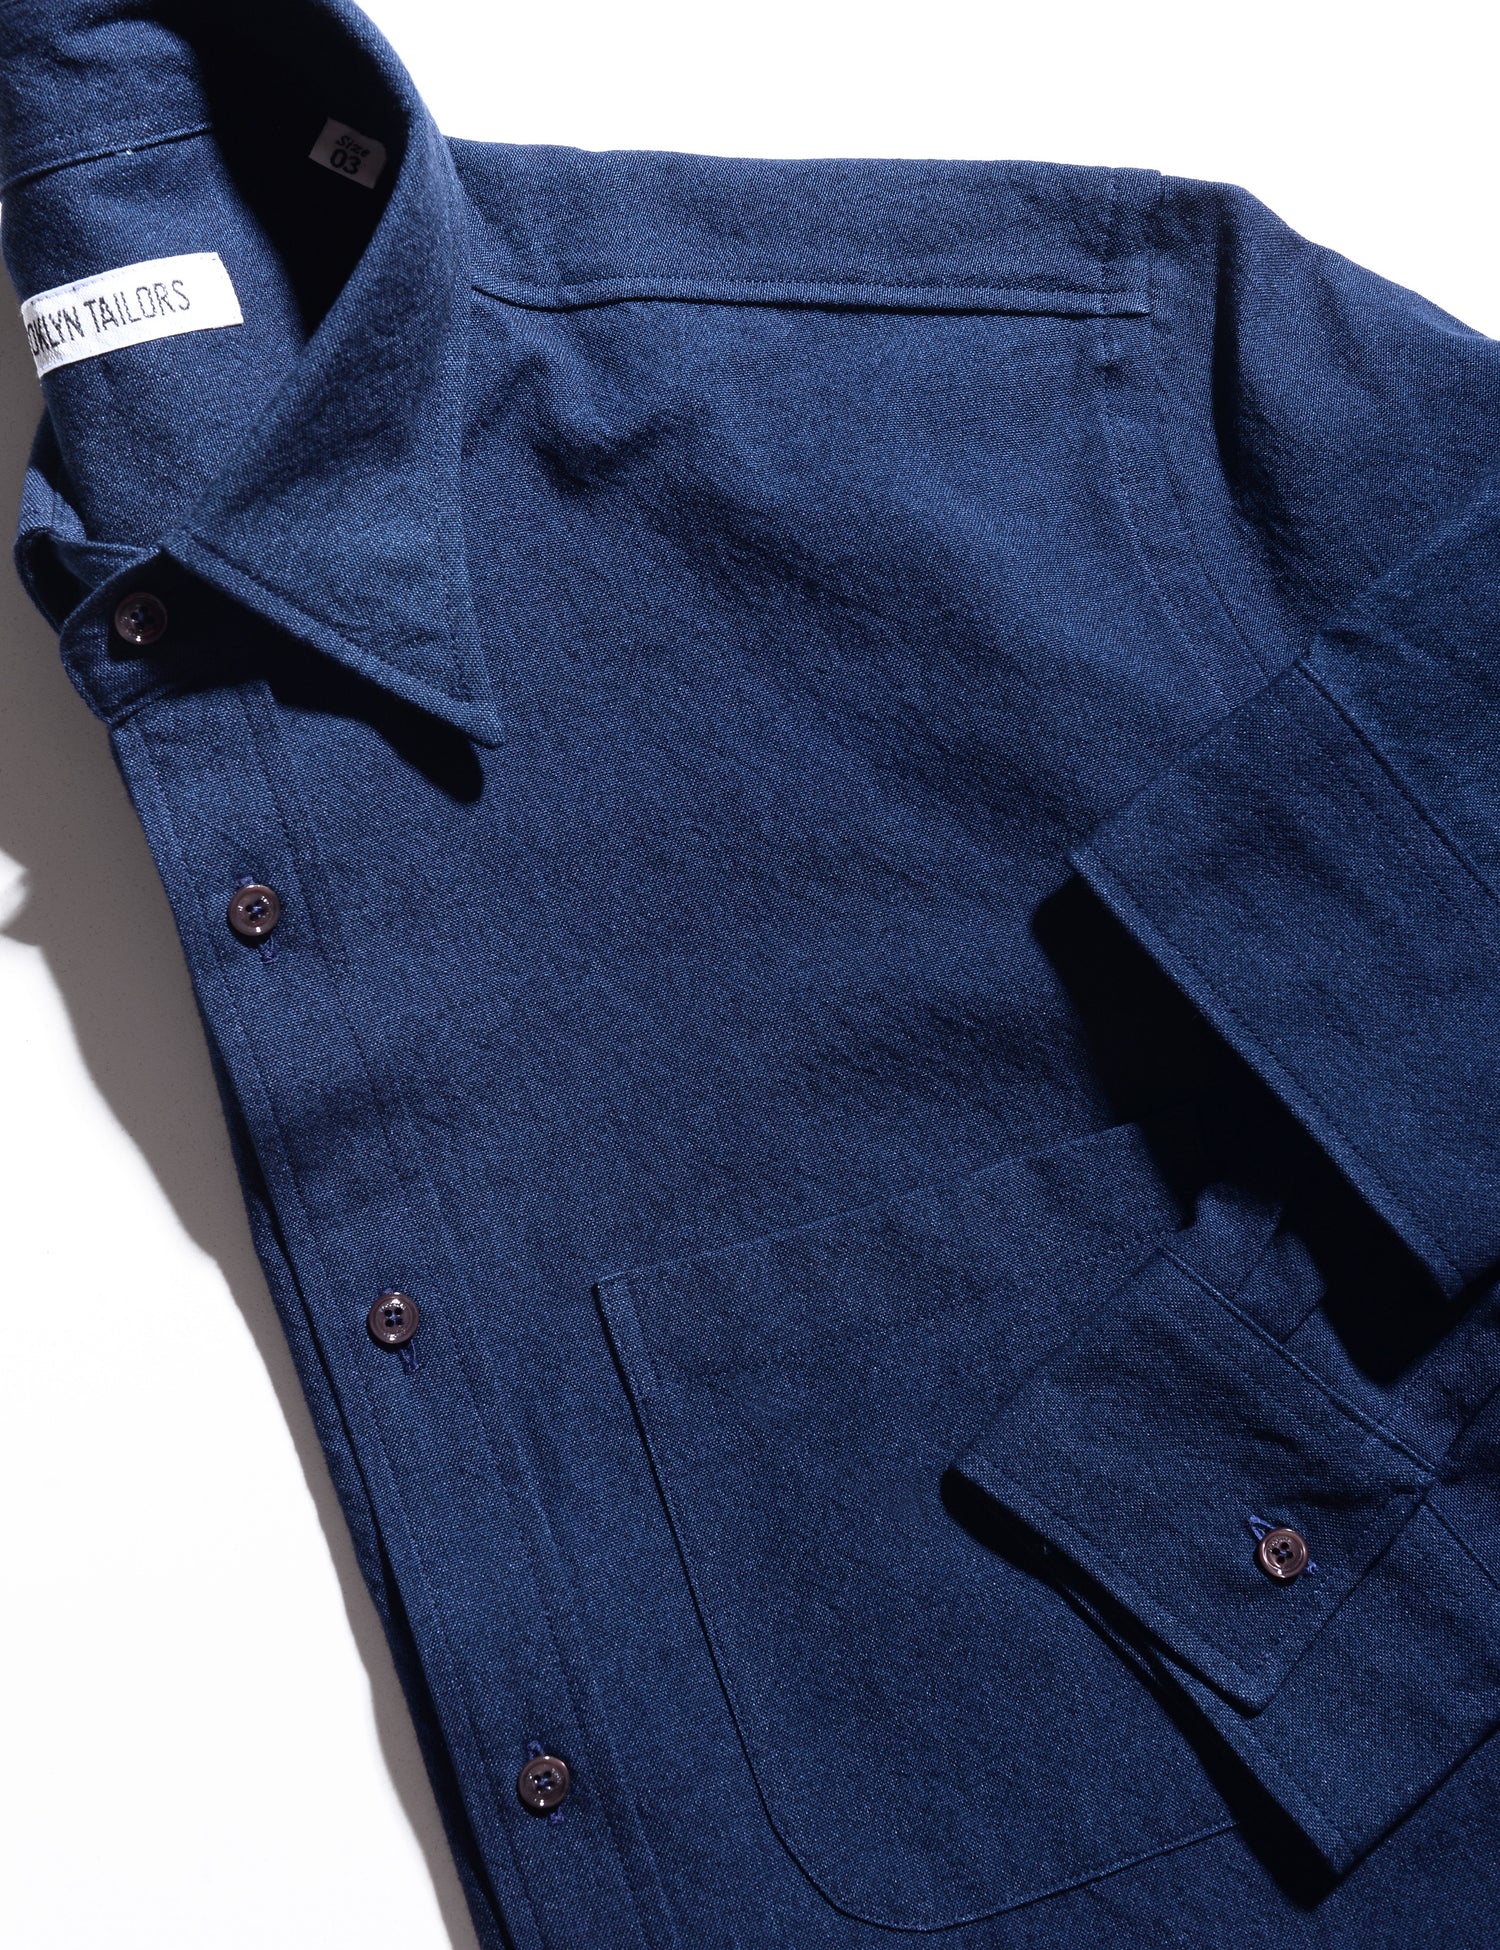 Detail of collar, buttons, and sleeve of Brooklyn Tailors BKT14 Casual Shirt in Sturdy Chambray - Deep Indigo